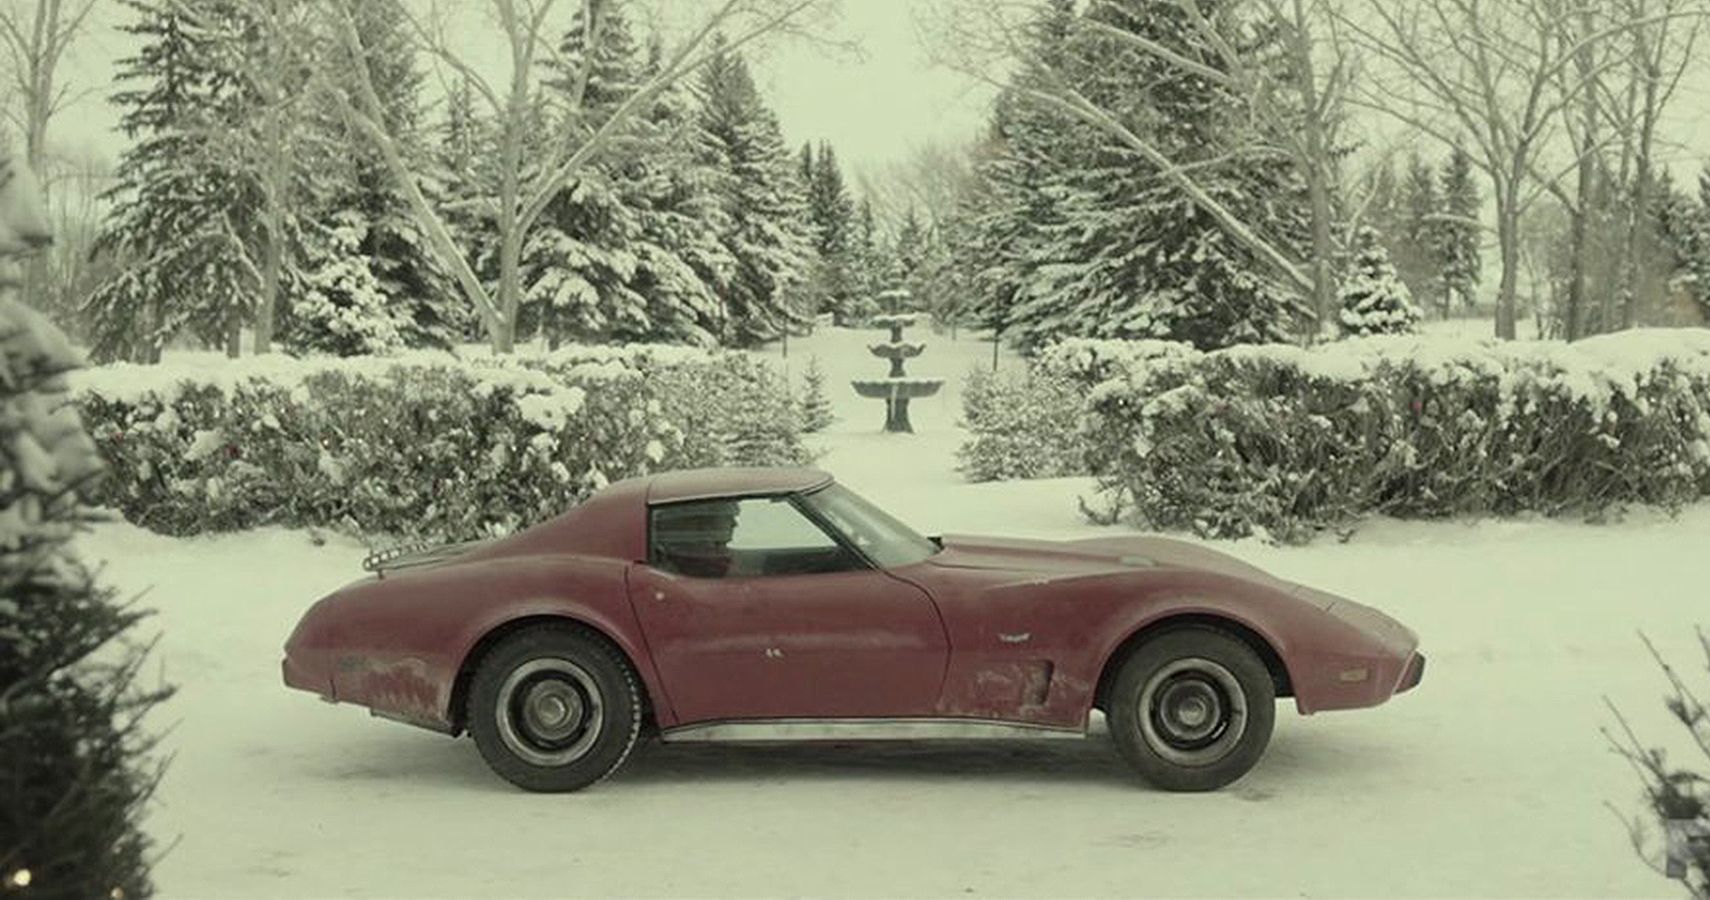 This Cherry Red 1977 Corvette From Fargo Was A Sight To Behold, Especially When Parked In The Snow